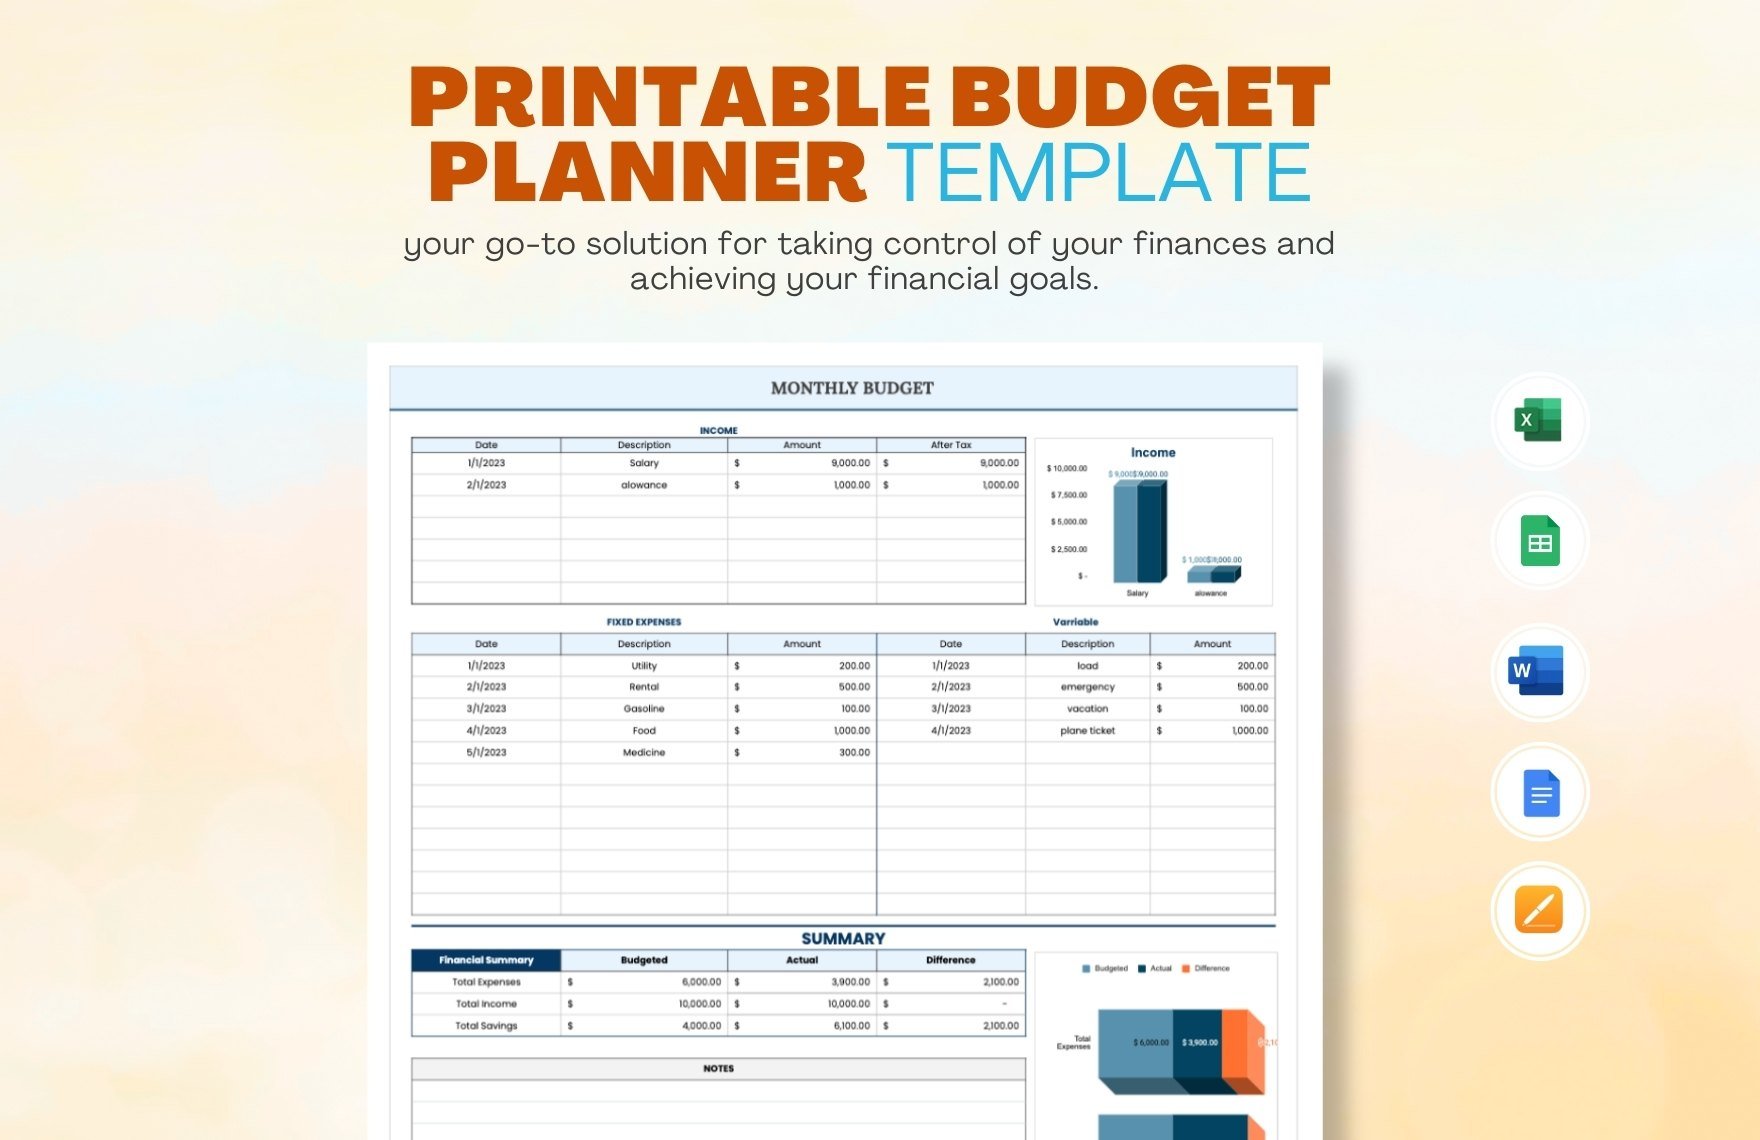 Printable Budget Planner Template in Word, Google Docs, Excel, PDF, Google Sheets, Apple Pages